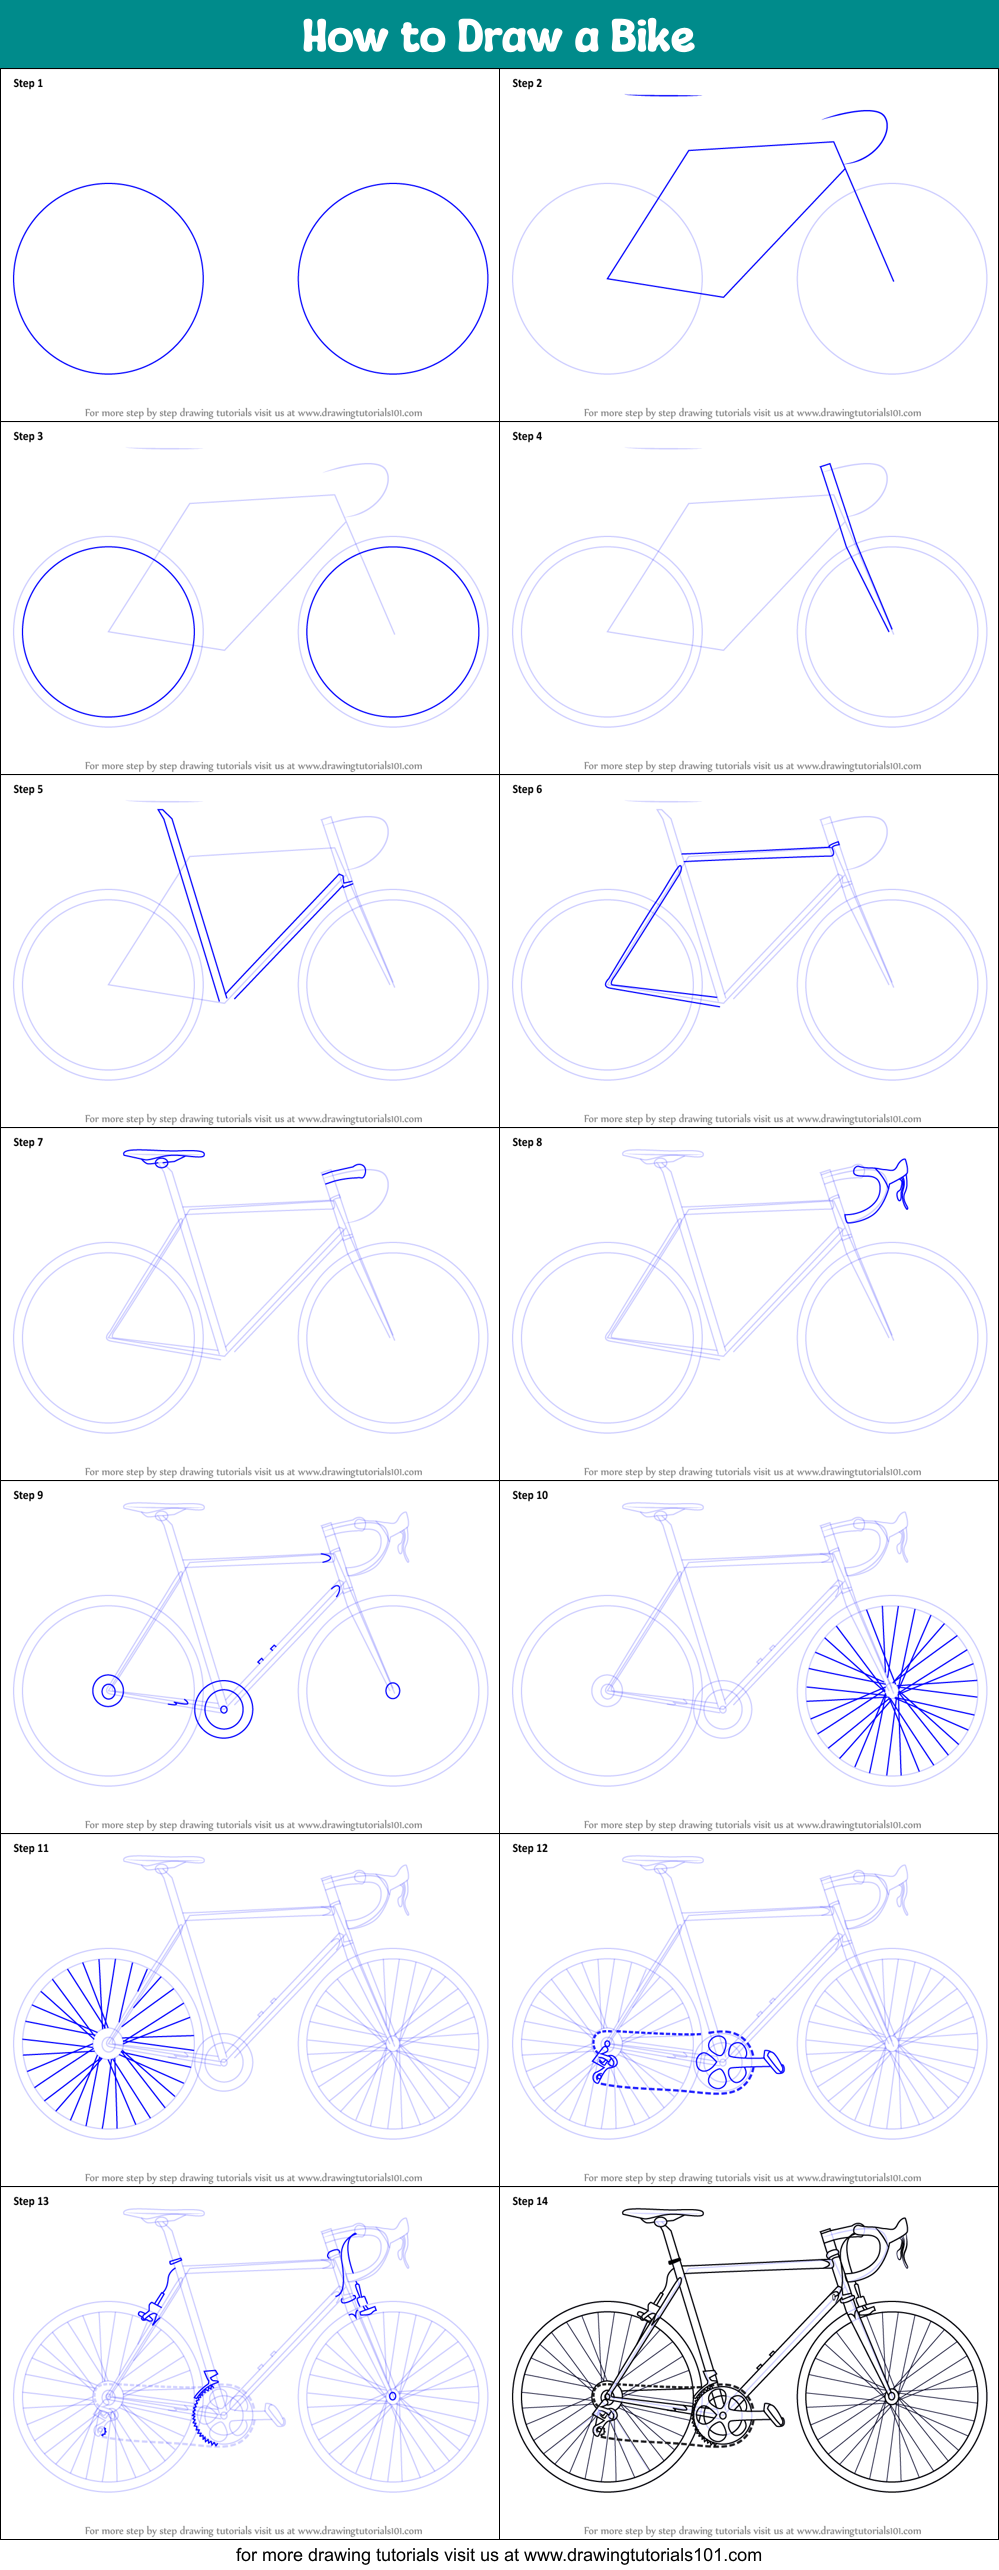 How to Draw a Bike printable step by step drawing sheet